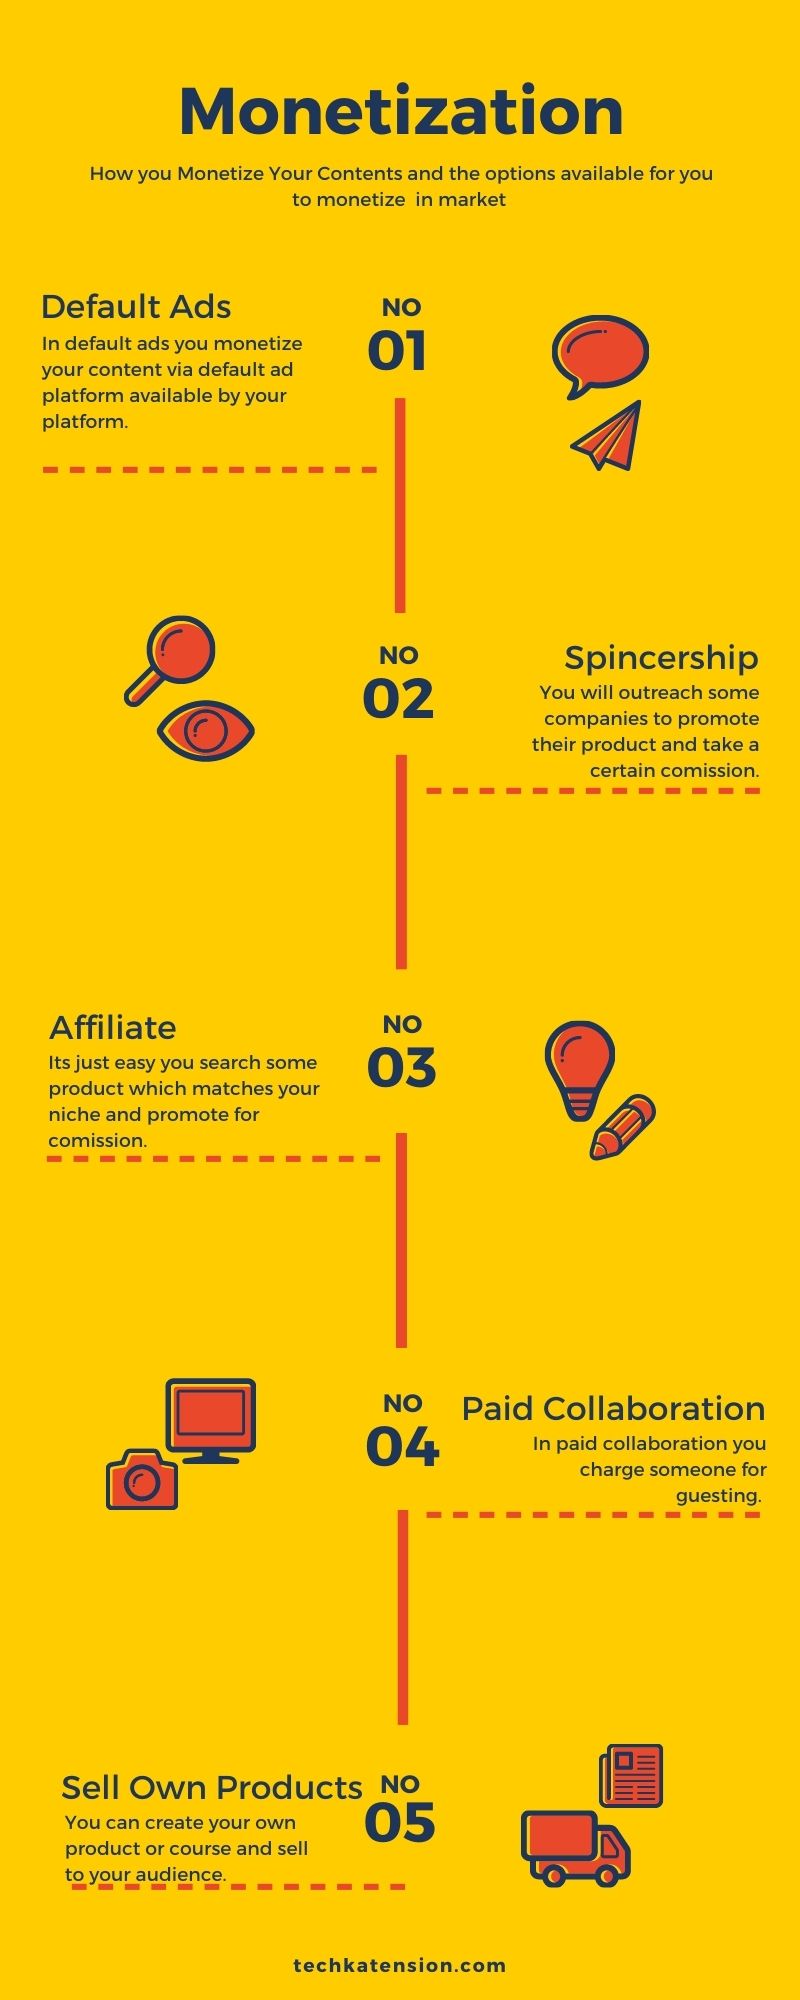 ways to monetize,monetize your content